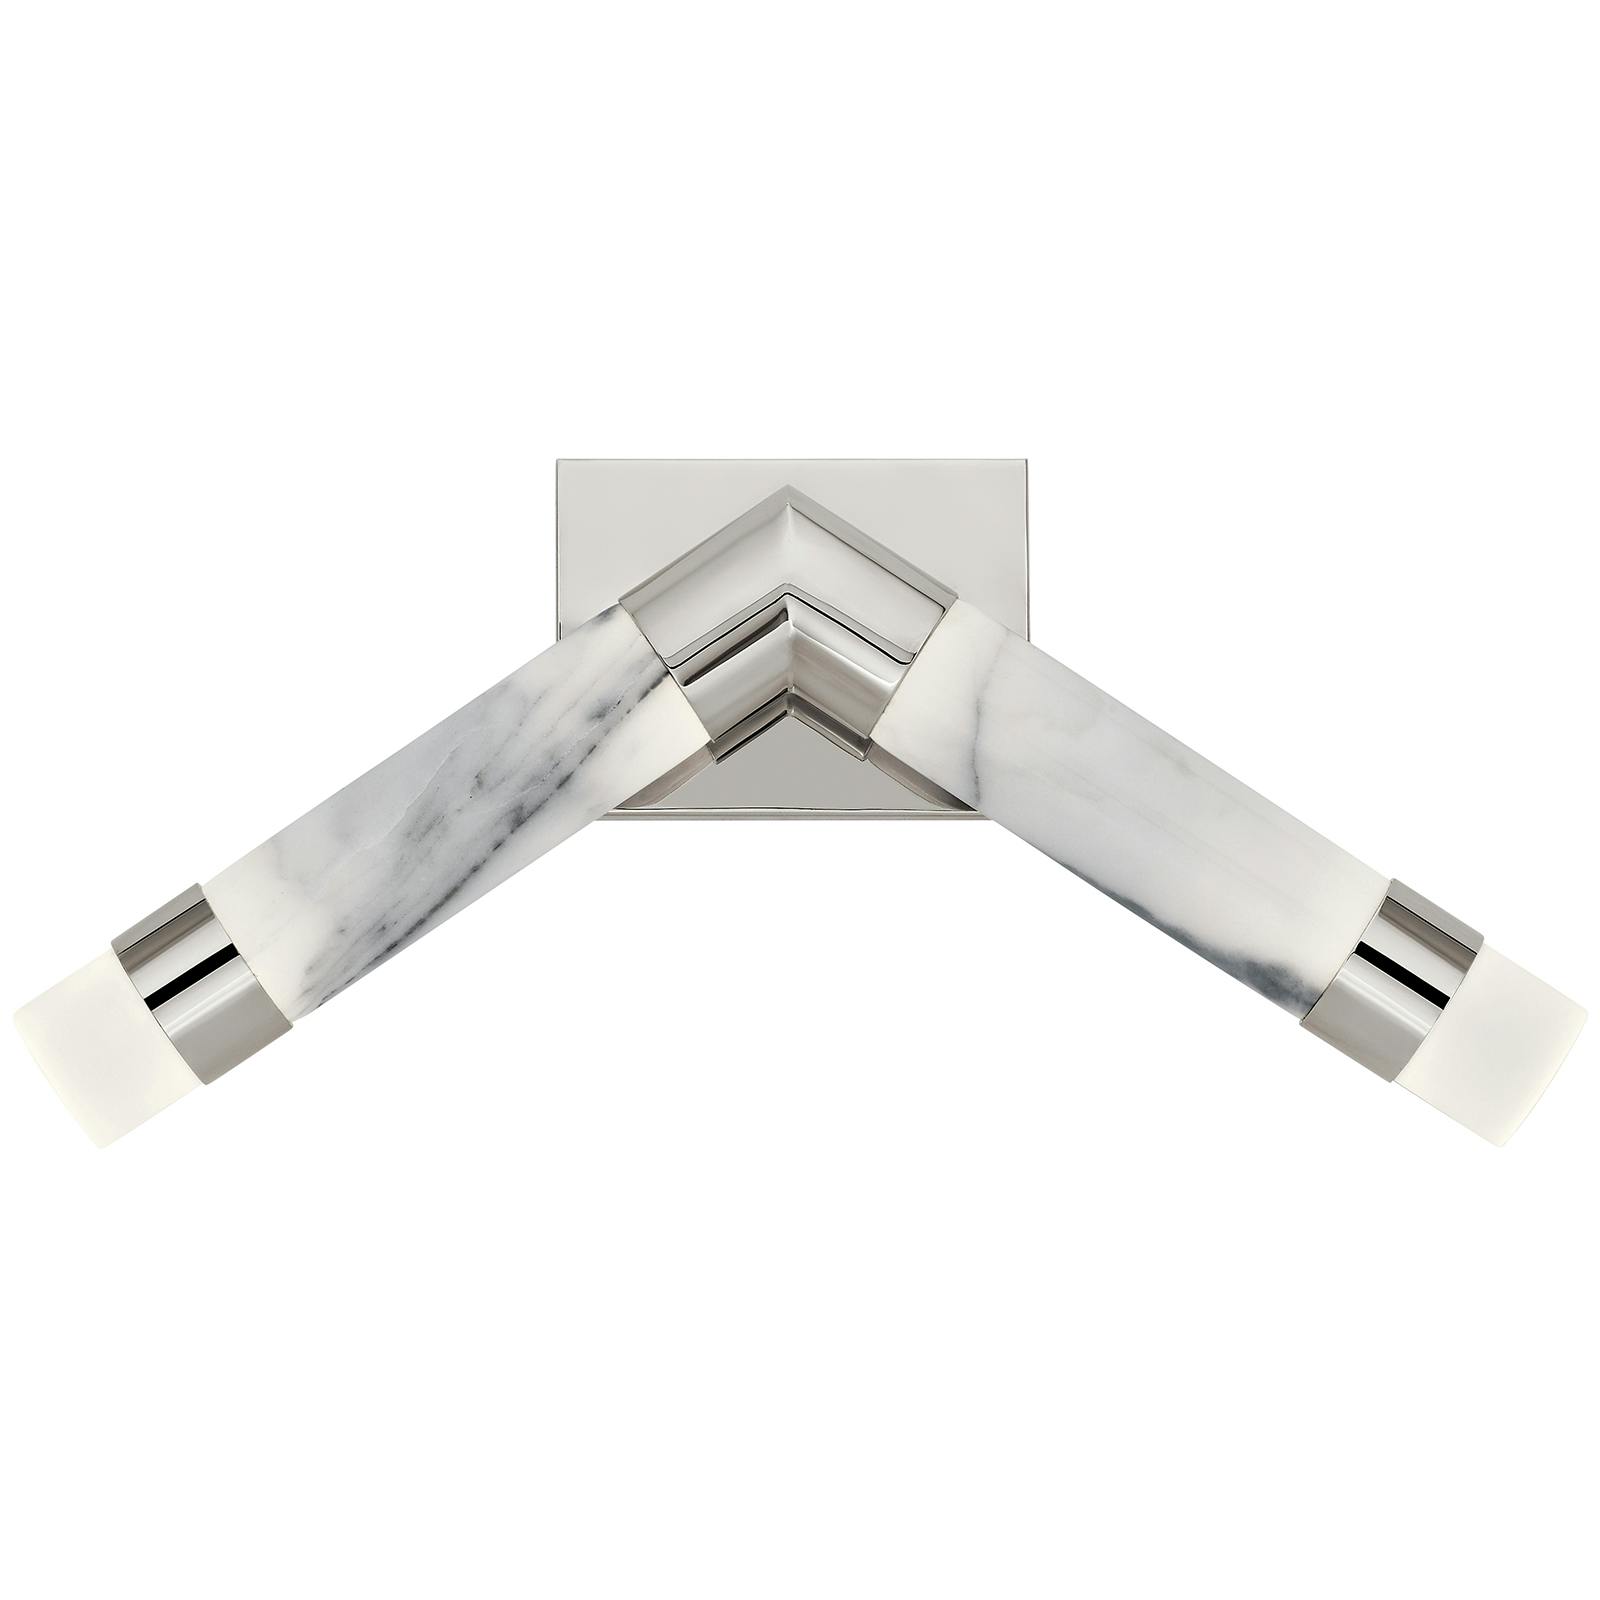 Front view of the Avedu Wall Sconce Polished Nickel on a white background